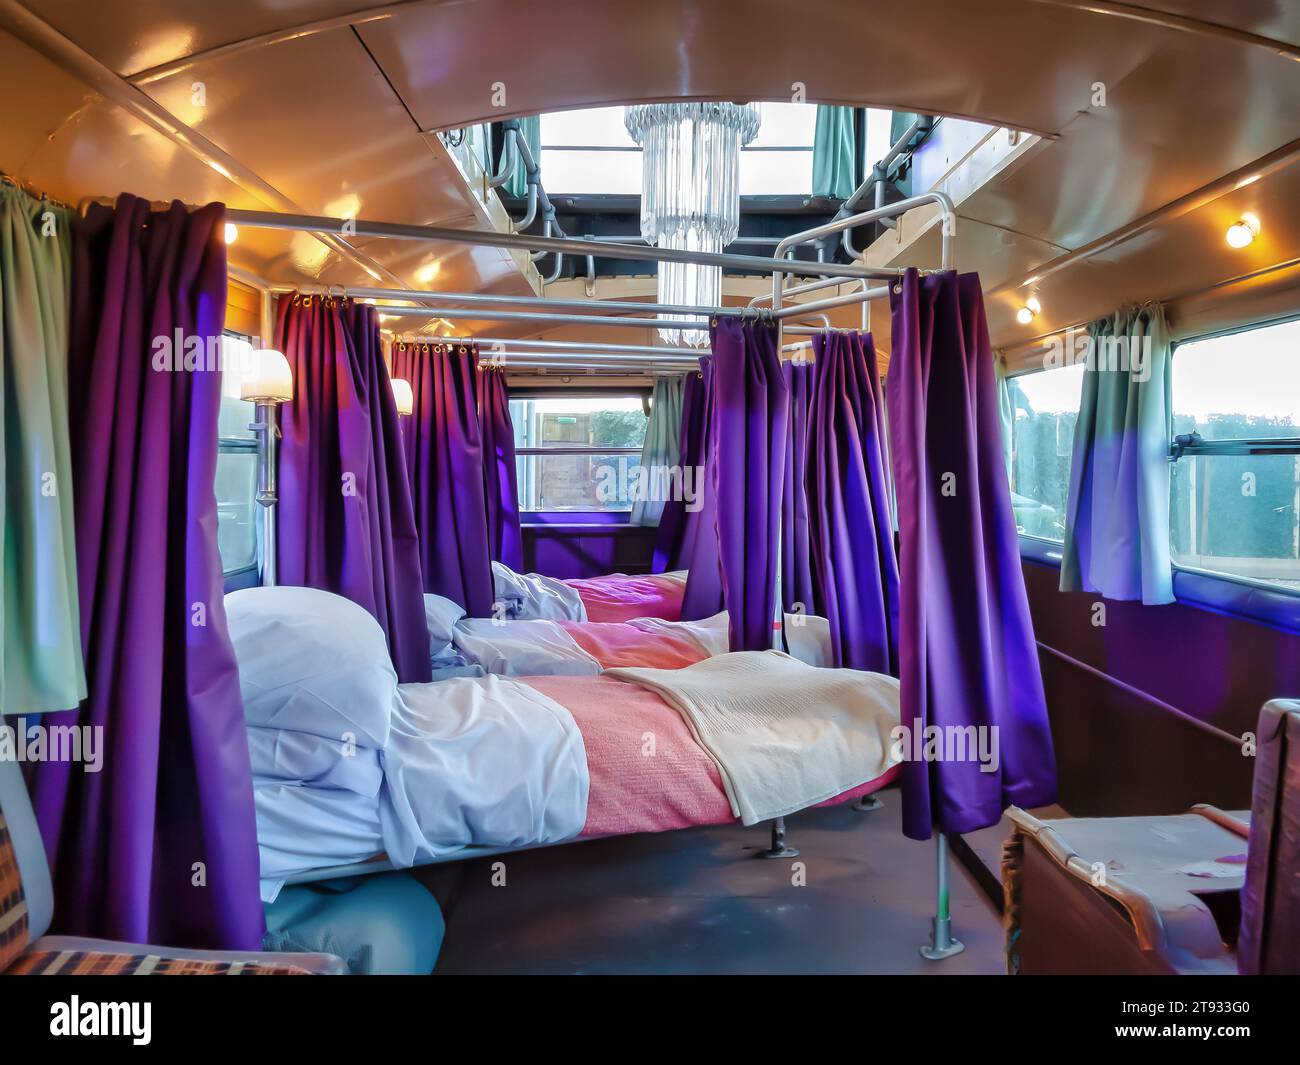 Inside the magical Knight bus Sleeping quarters, taken at the Harry Potter Studio Tour Stock Photo